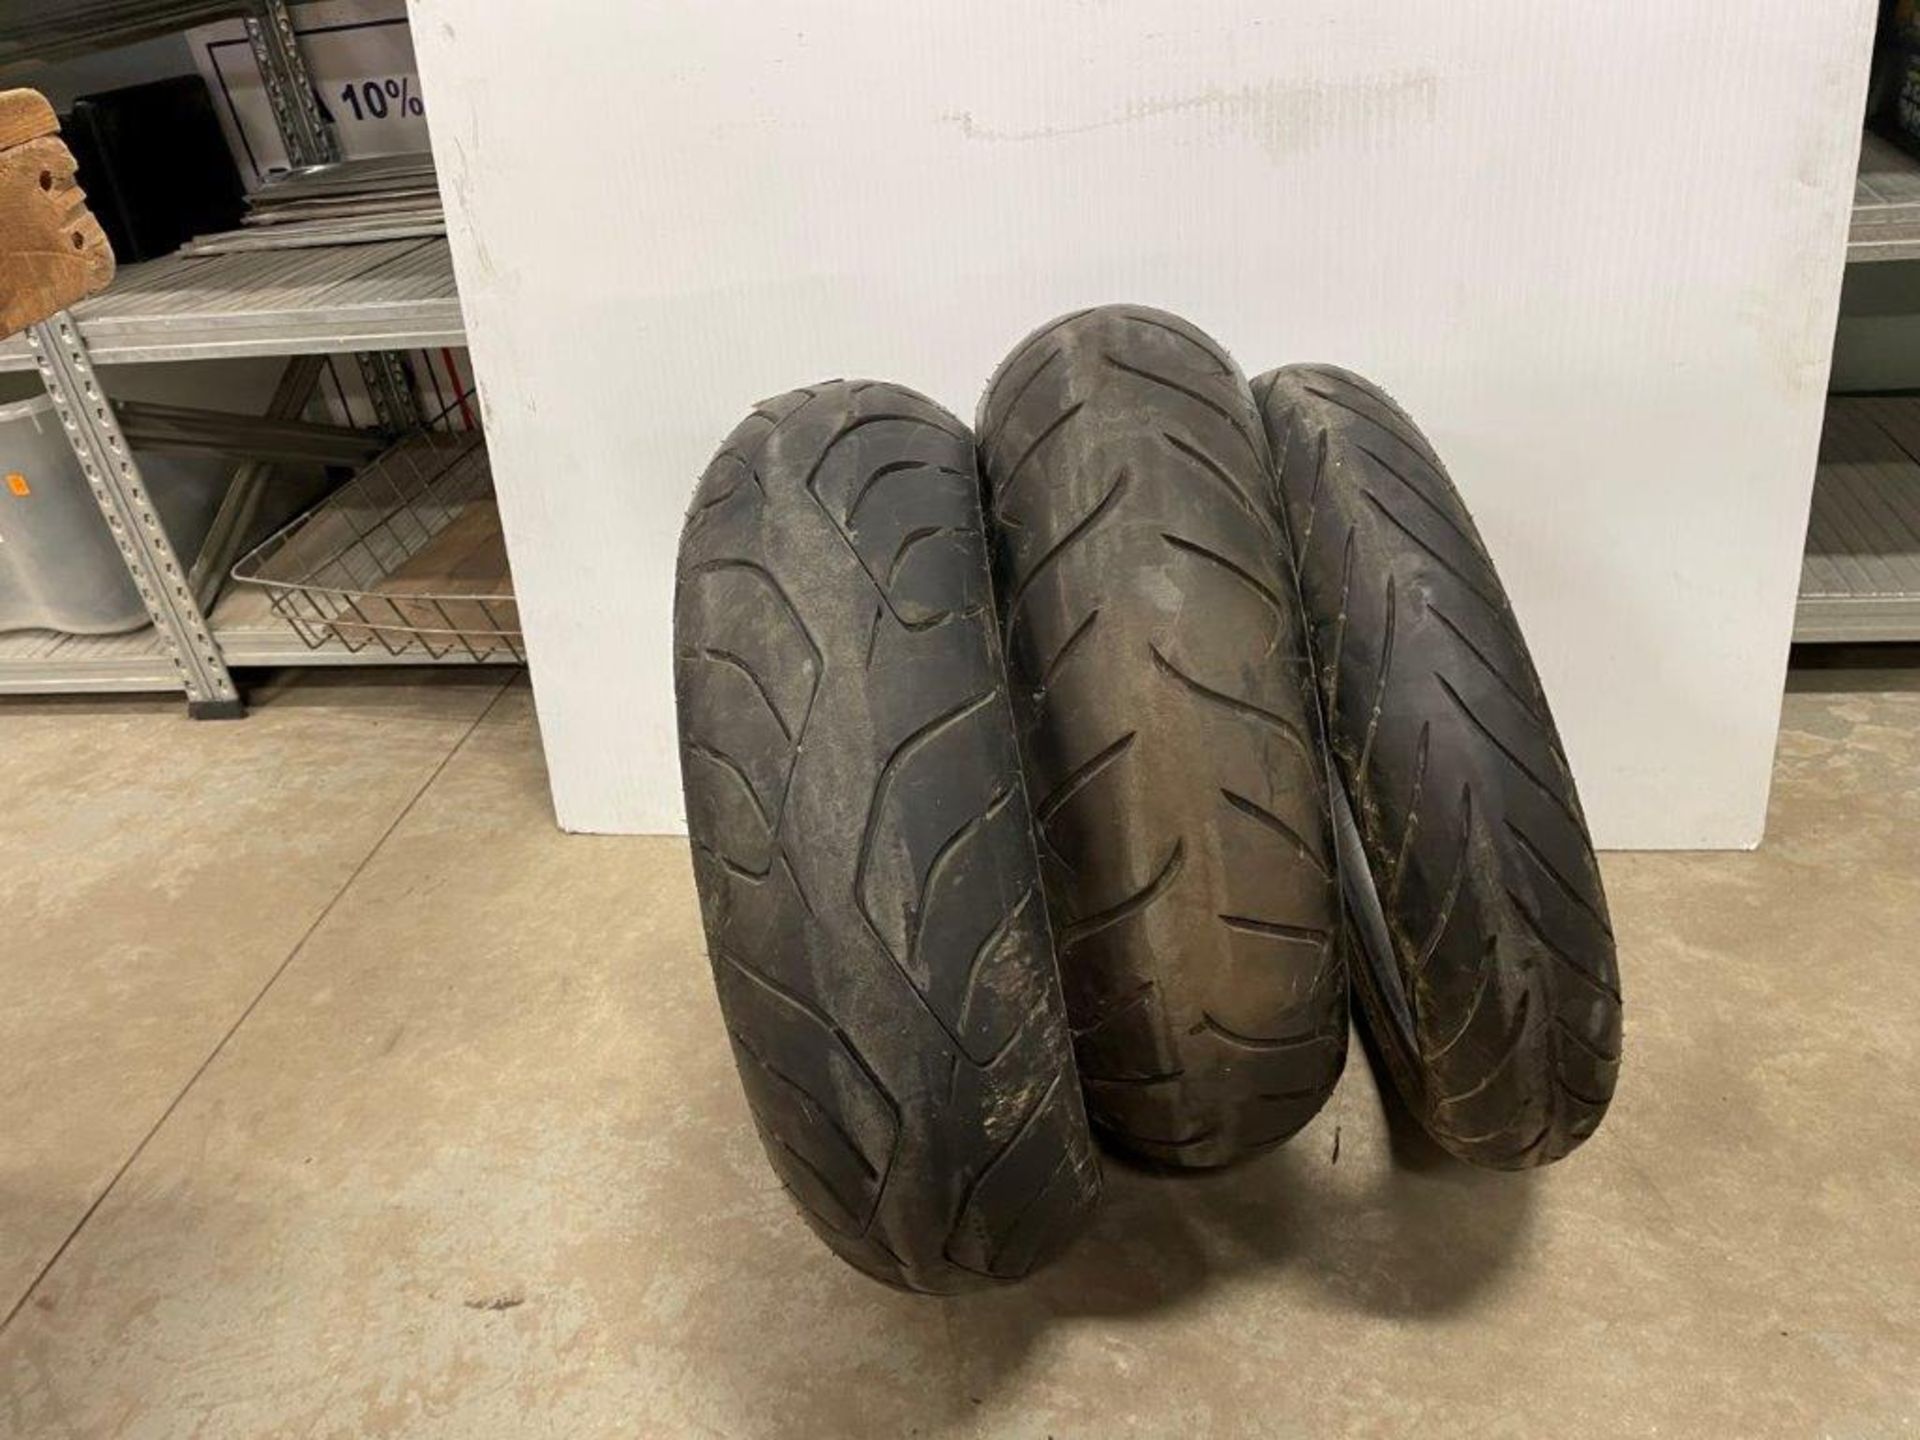 2-REAR MOTORCYCLE TIRES 180/55ZR 17M, 1-FRONT 120/70ZR 17M AND STREET MOTORCYCLE WINDSHIELDS - Image 4 of 6